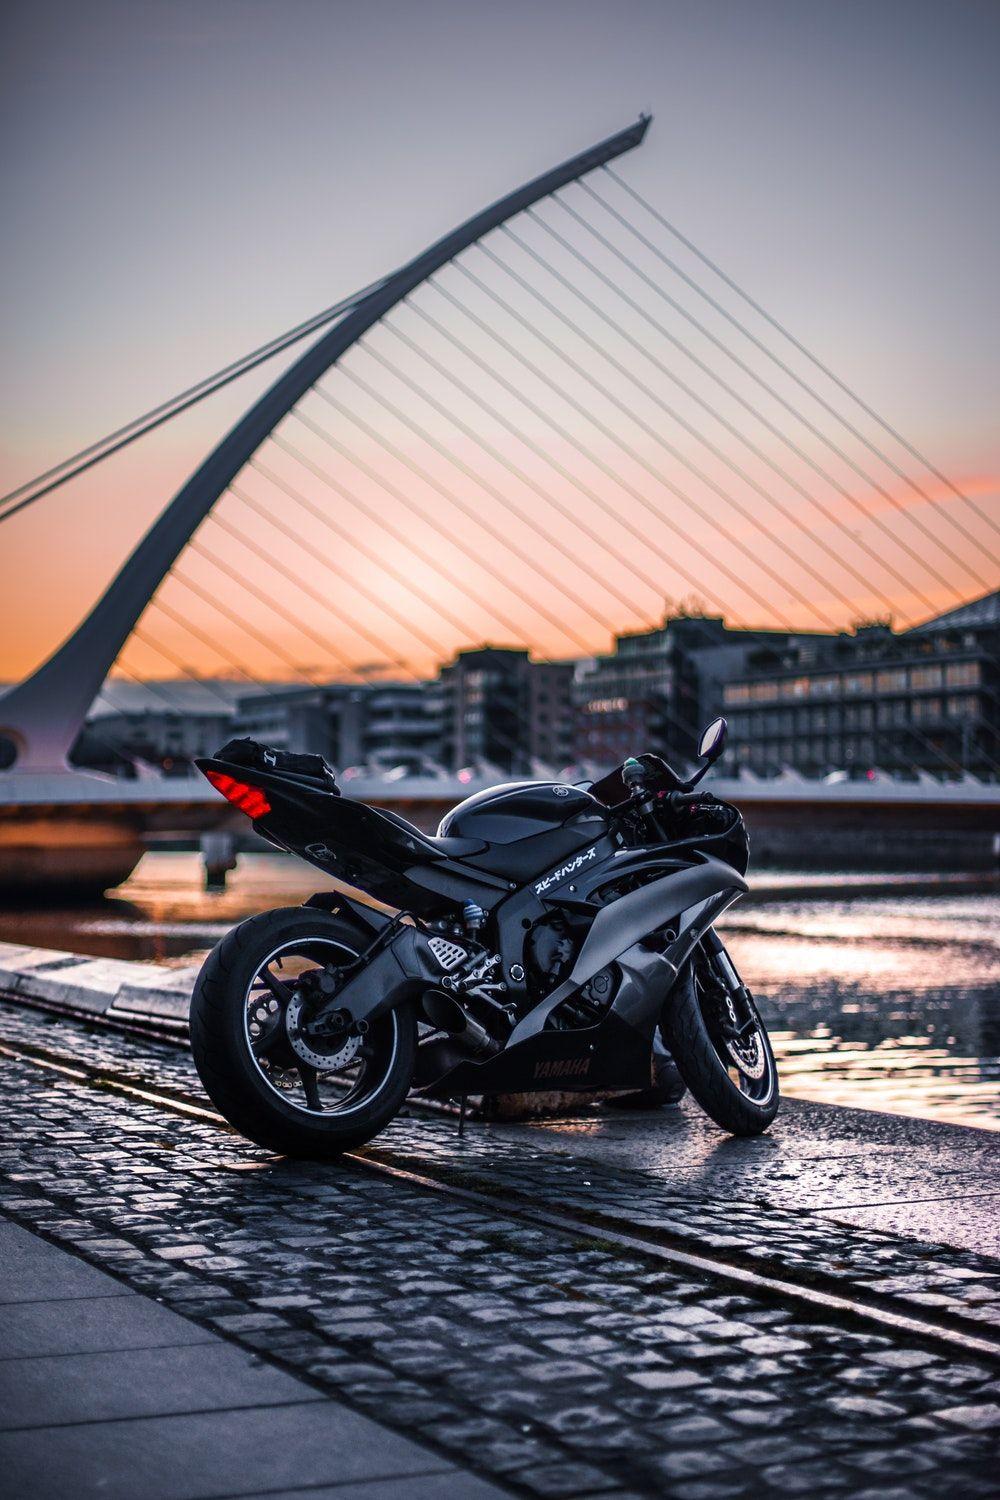 Motorbike Picture. Download Free Image